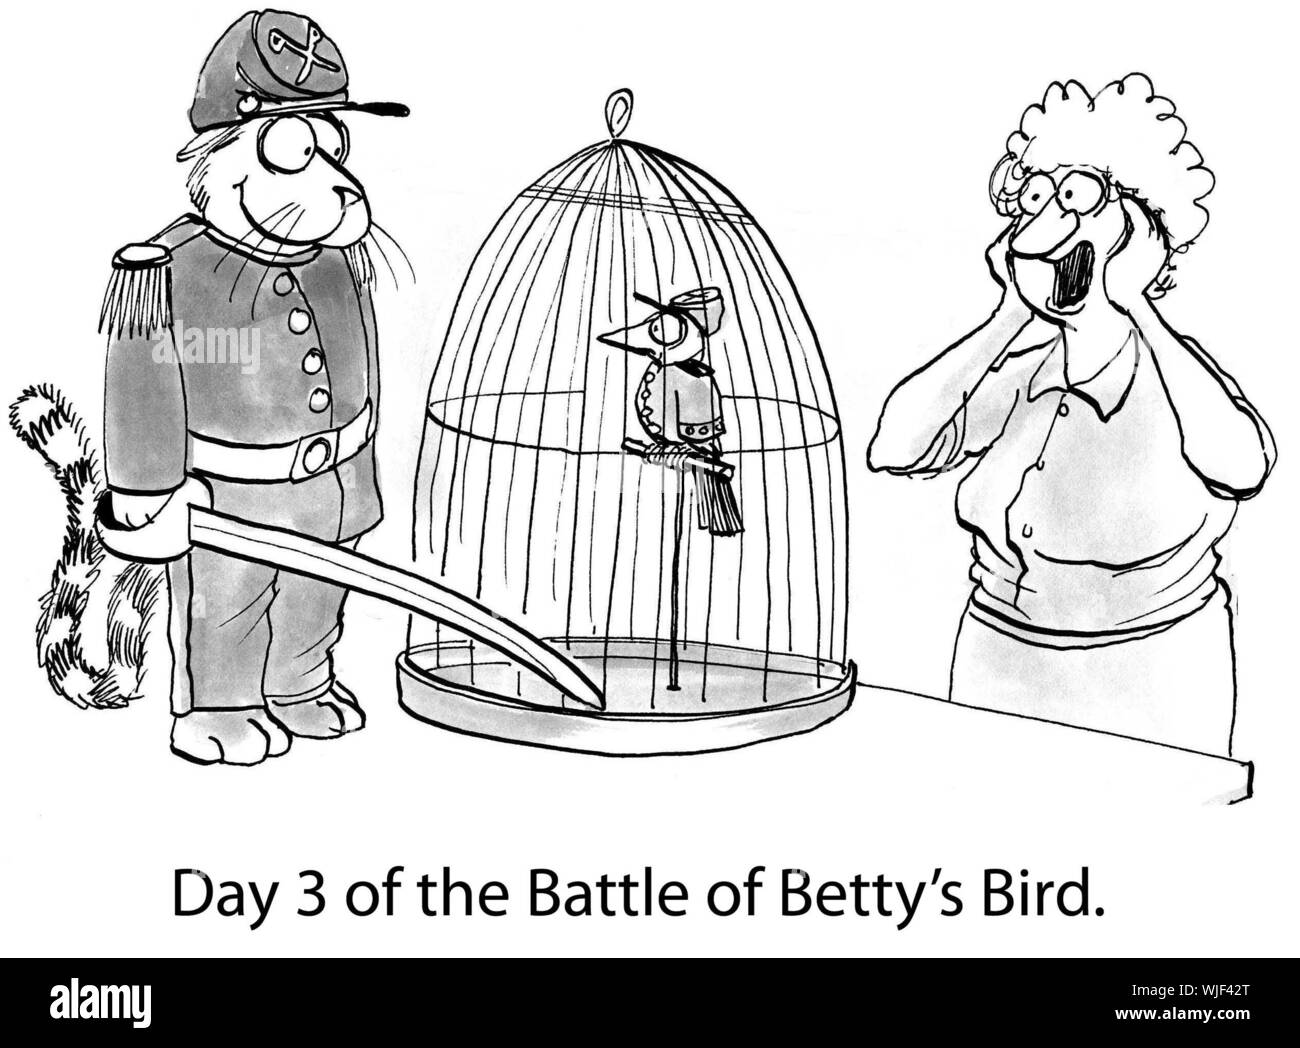 Day 3 of the Battle of Betty's Bird. Stock Photo